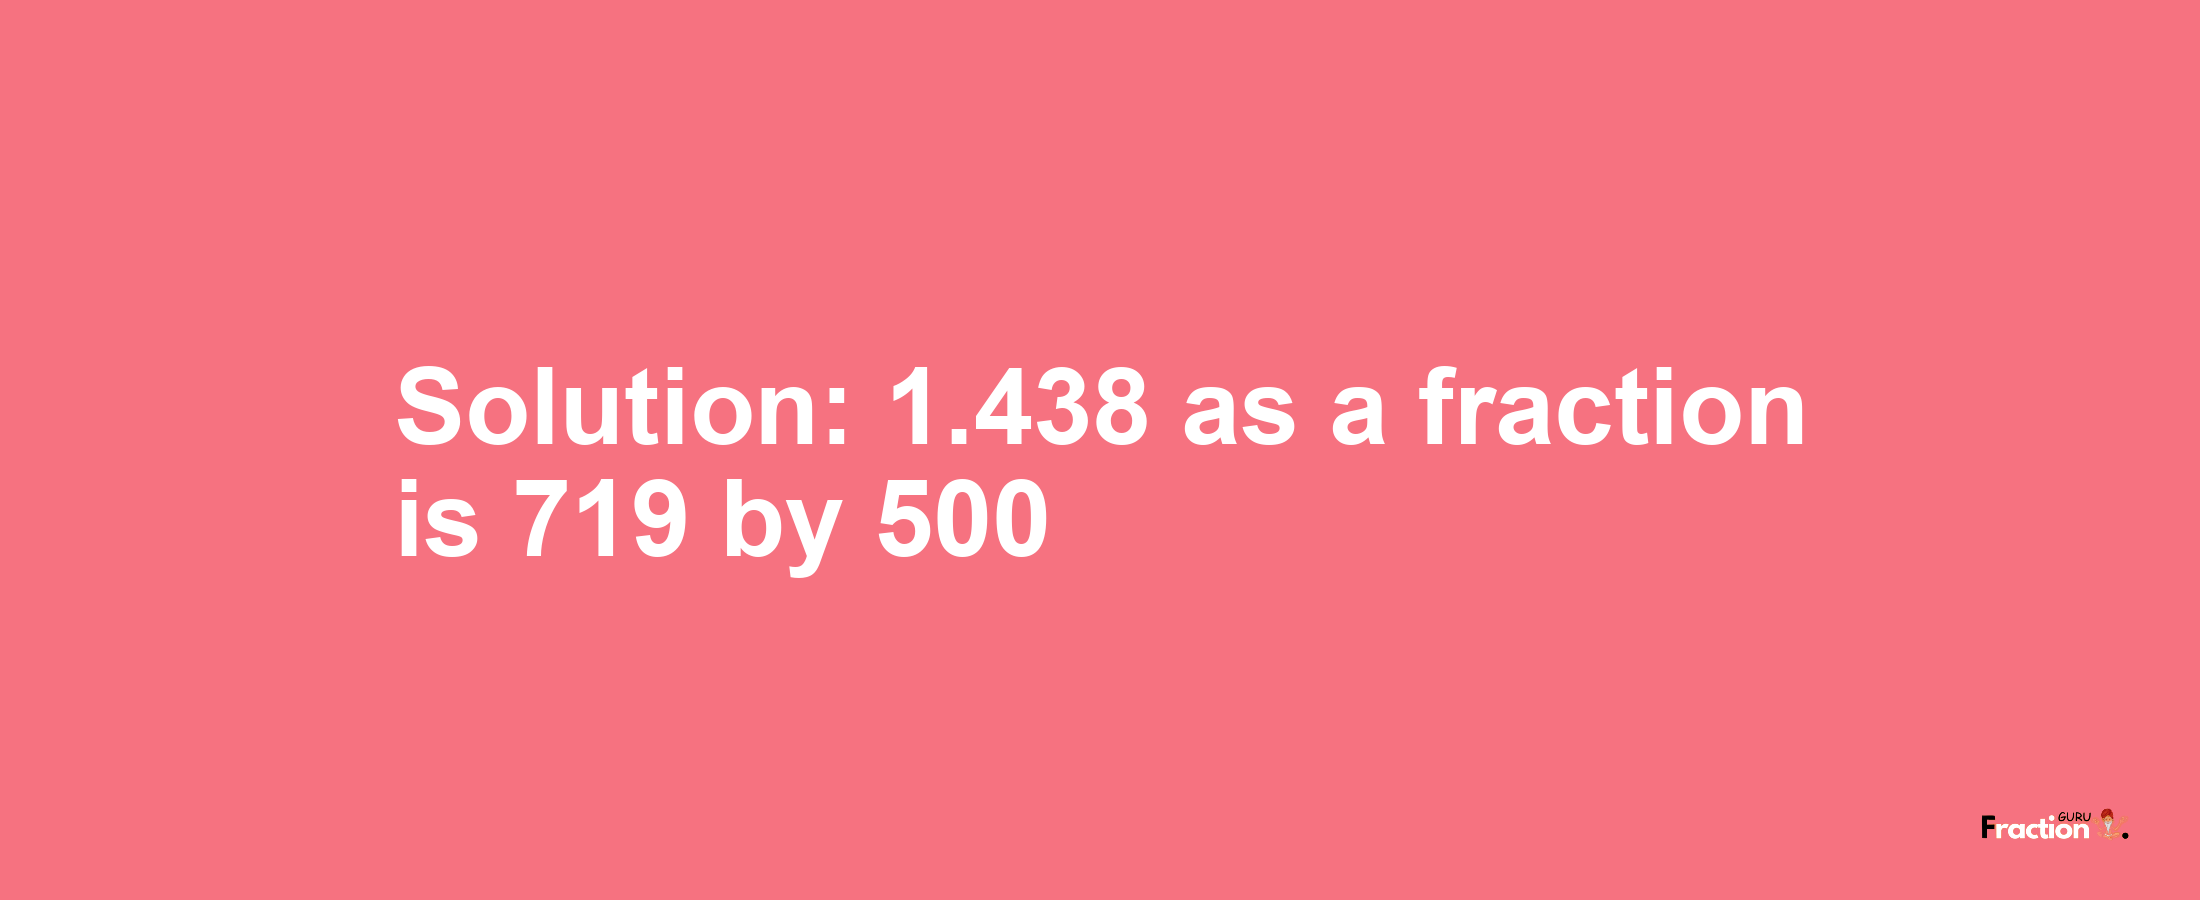 Solution:1.438 as a fraction is 719/500